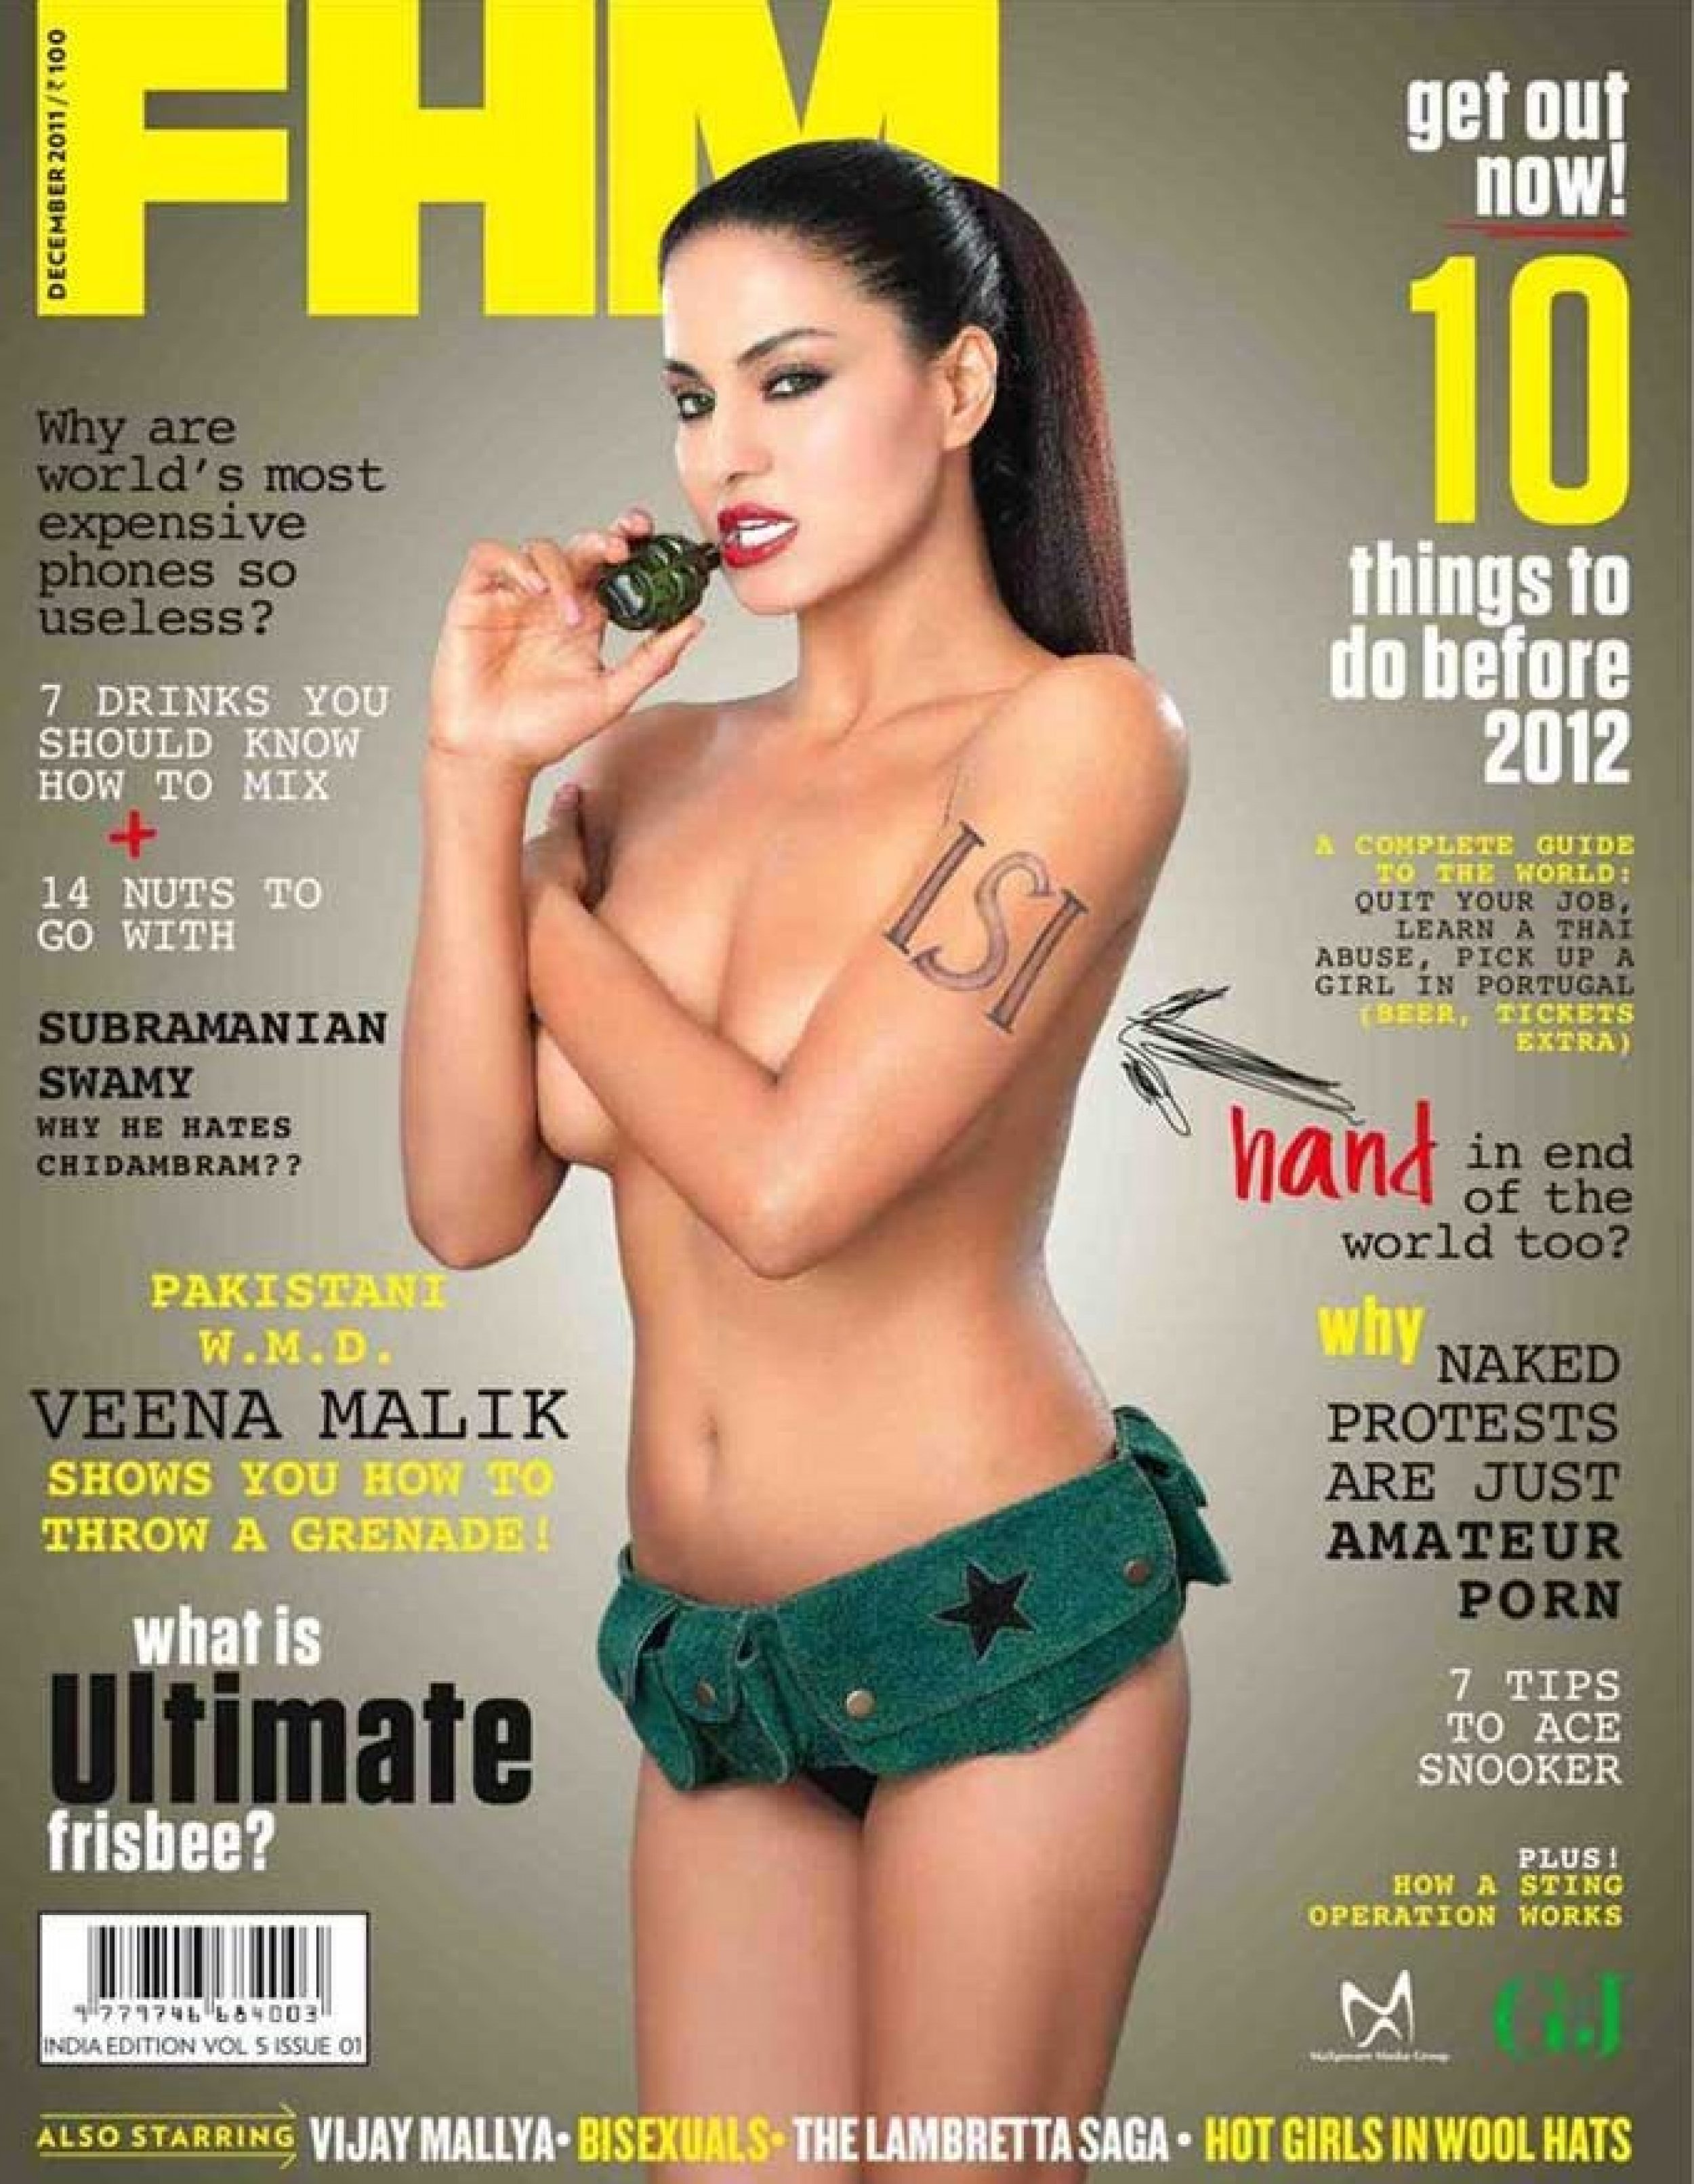 Veena Malik FHM India Cover Shame for All Muslims, Father Has Disowned Her IBTimes